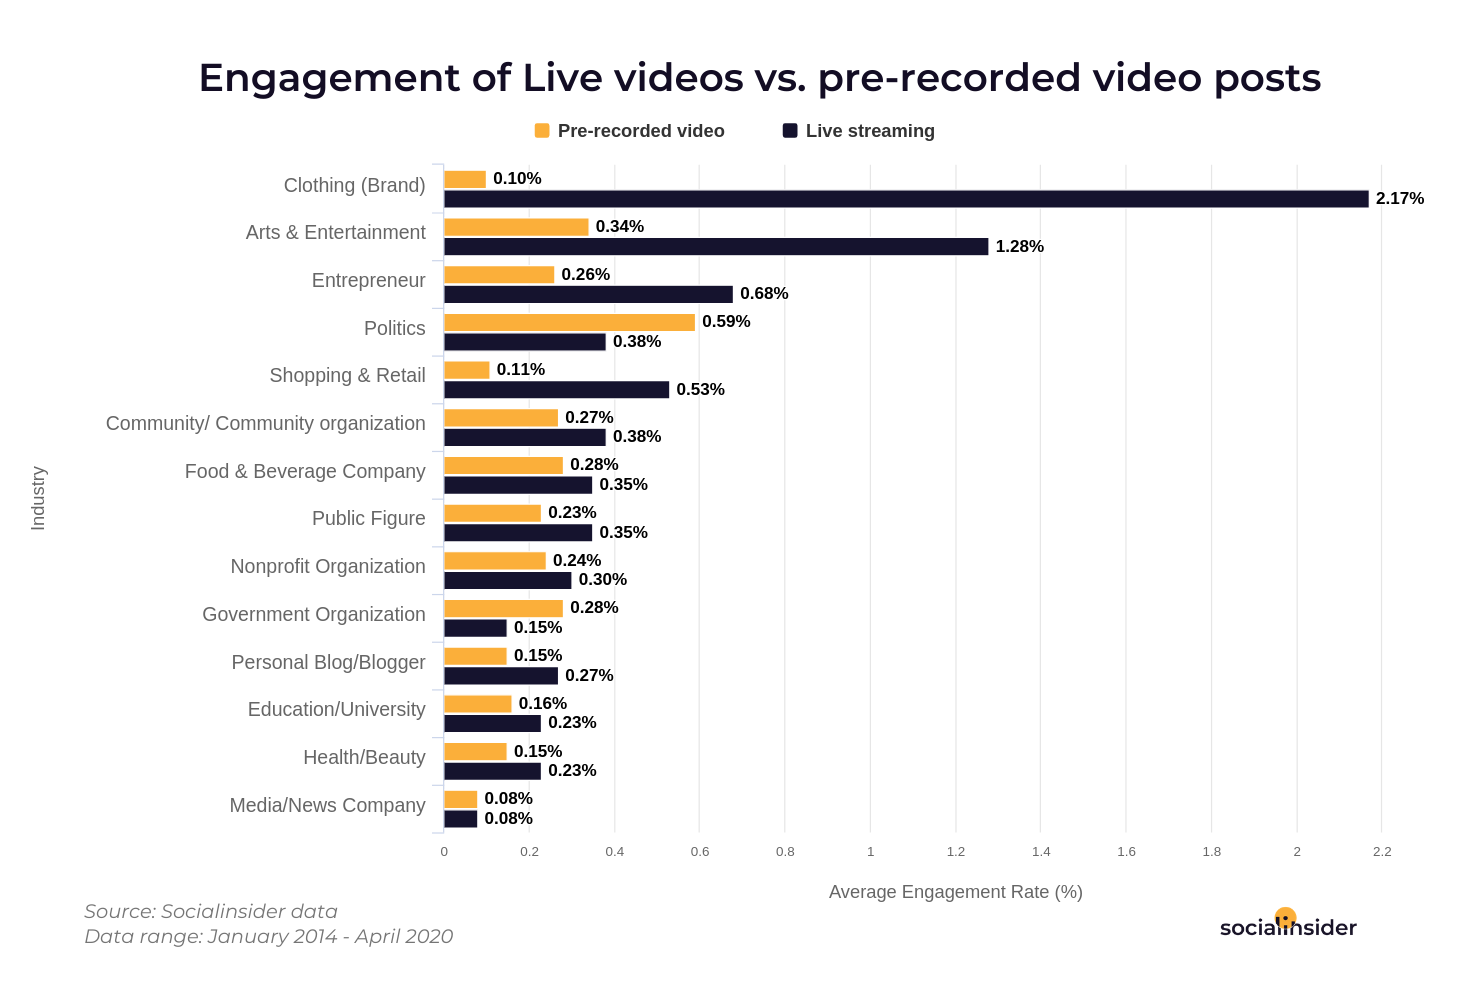 How live stream perform versus pre-recorded video posts.